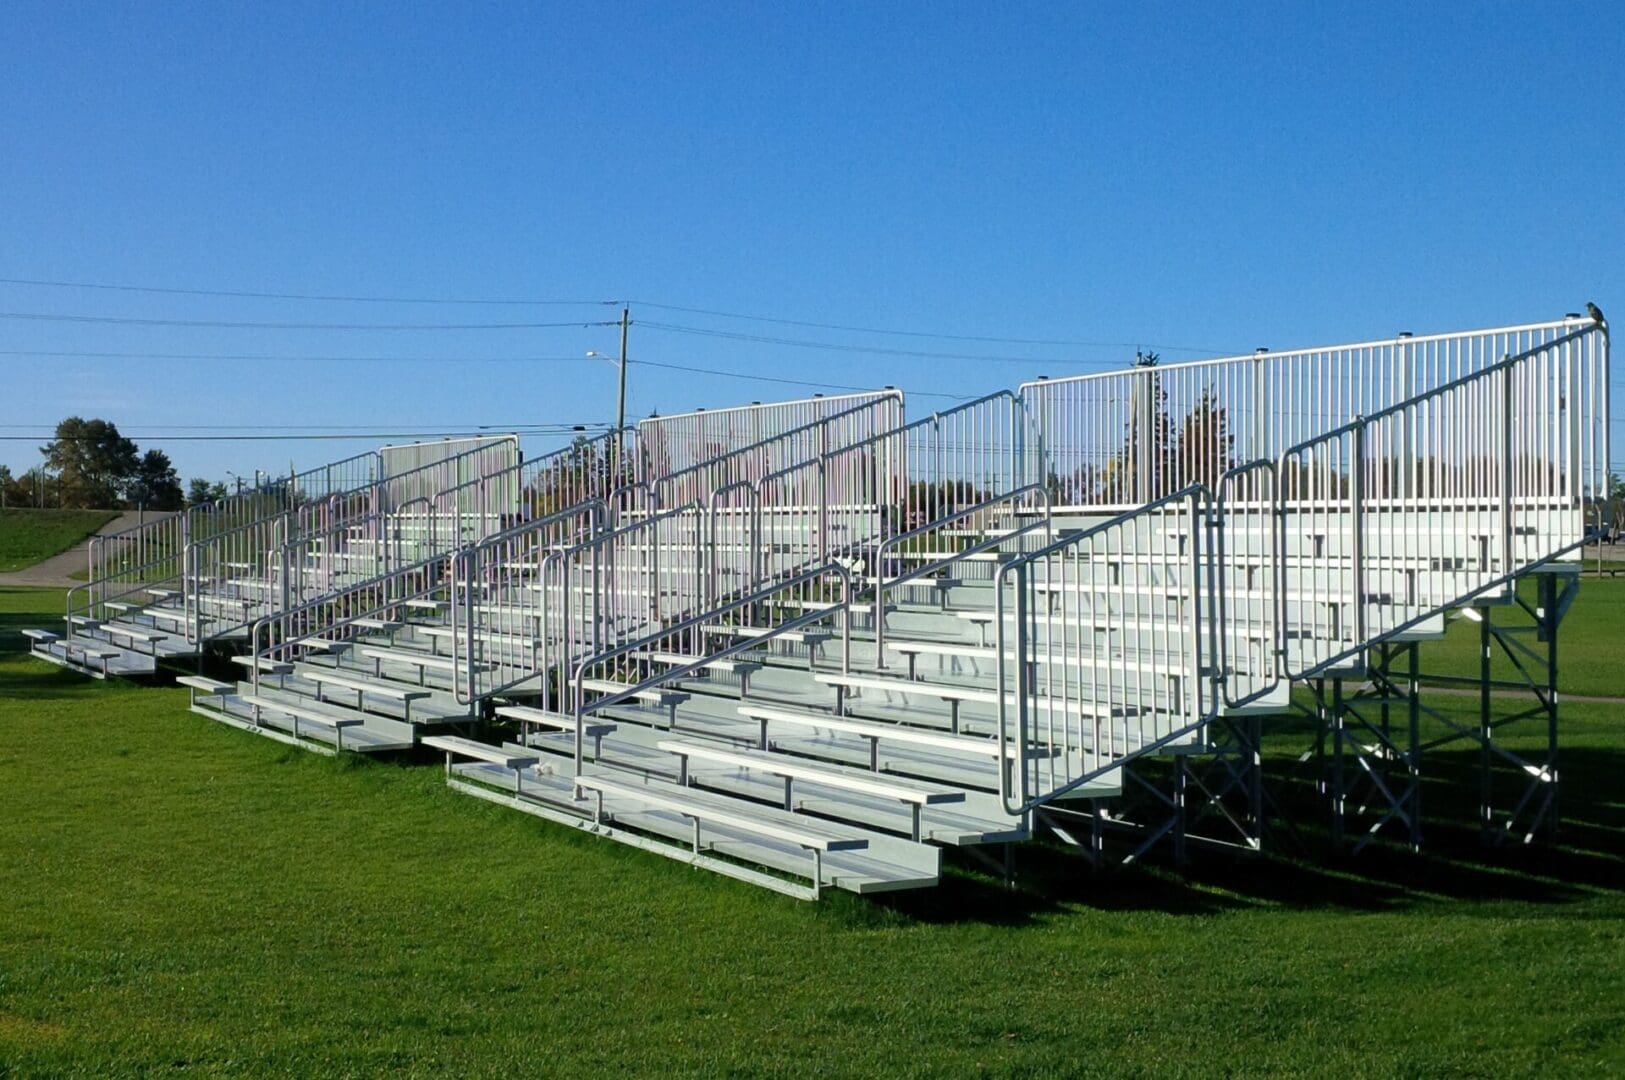 A bleacher with metal rails and seats in the middle of an empty field.